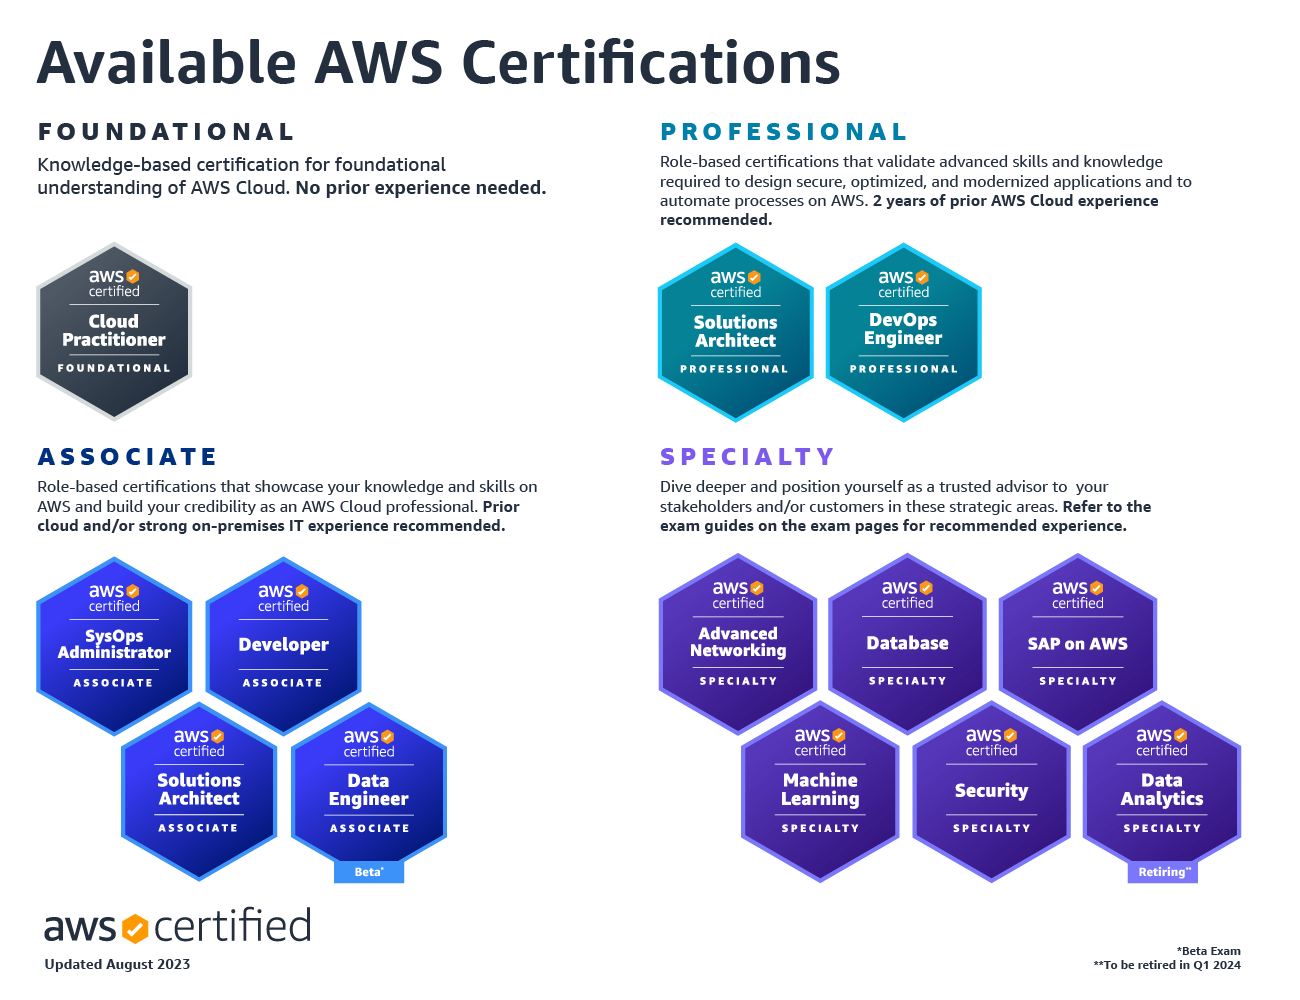 13 AWS Certification badges for Foundational, Associate, Professional and Specialty AWS Certifications